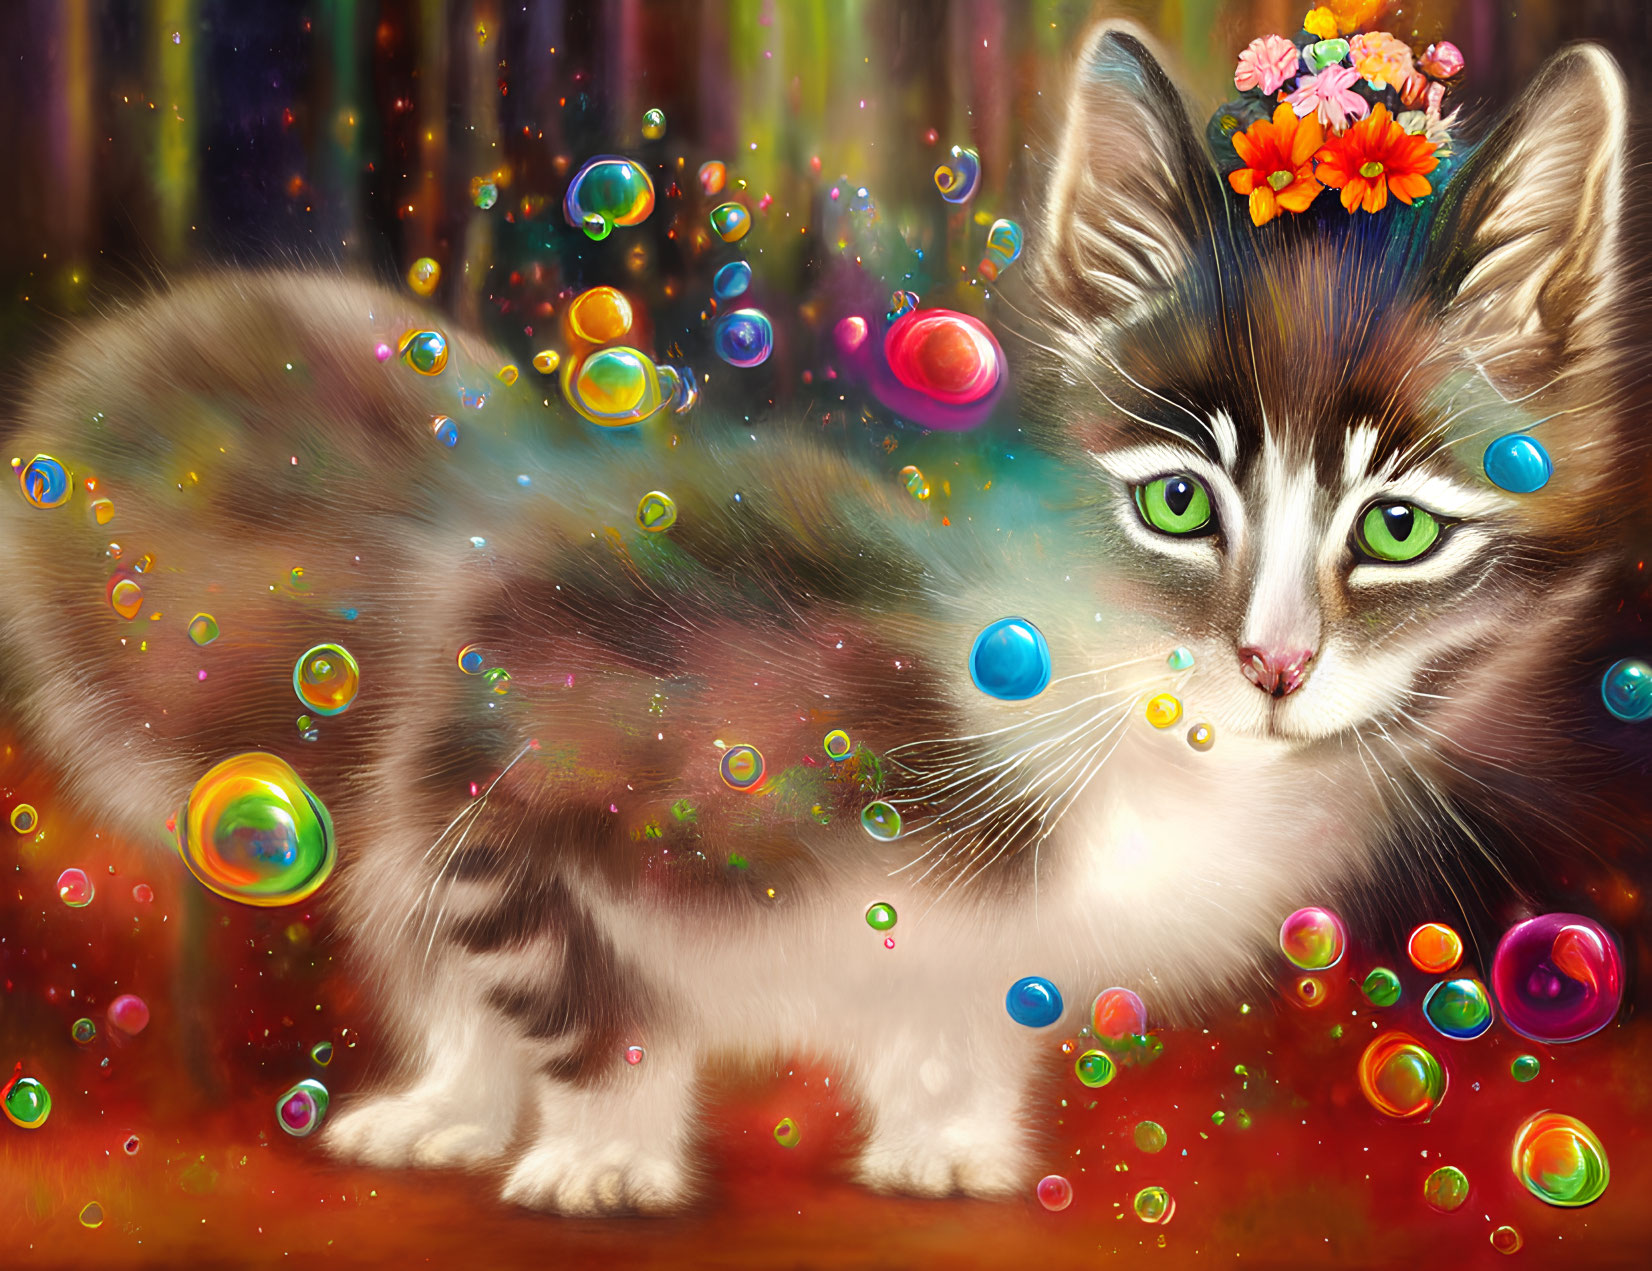 Fluffy kitten illustration with green eyes and vibrant bubbles